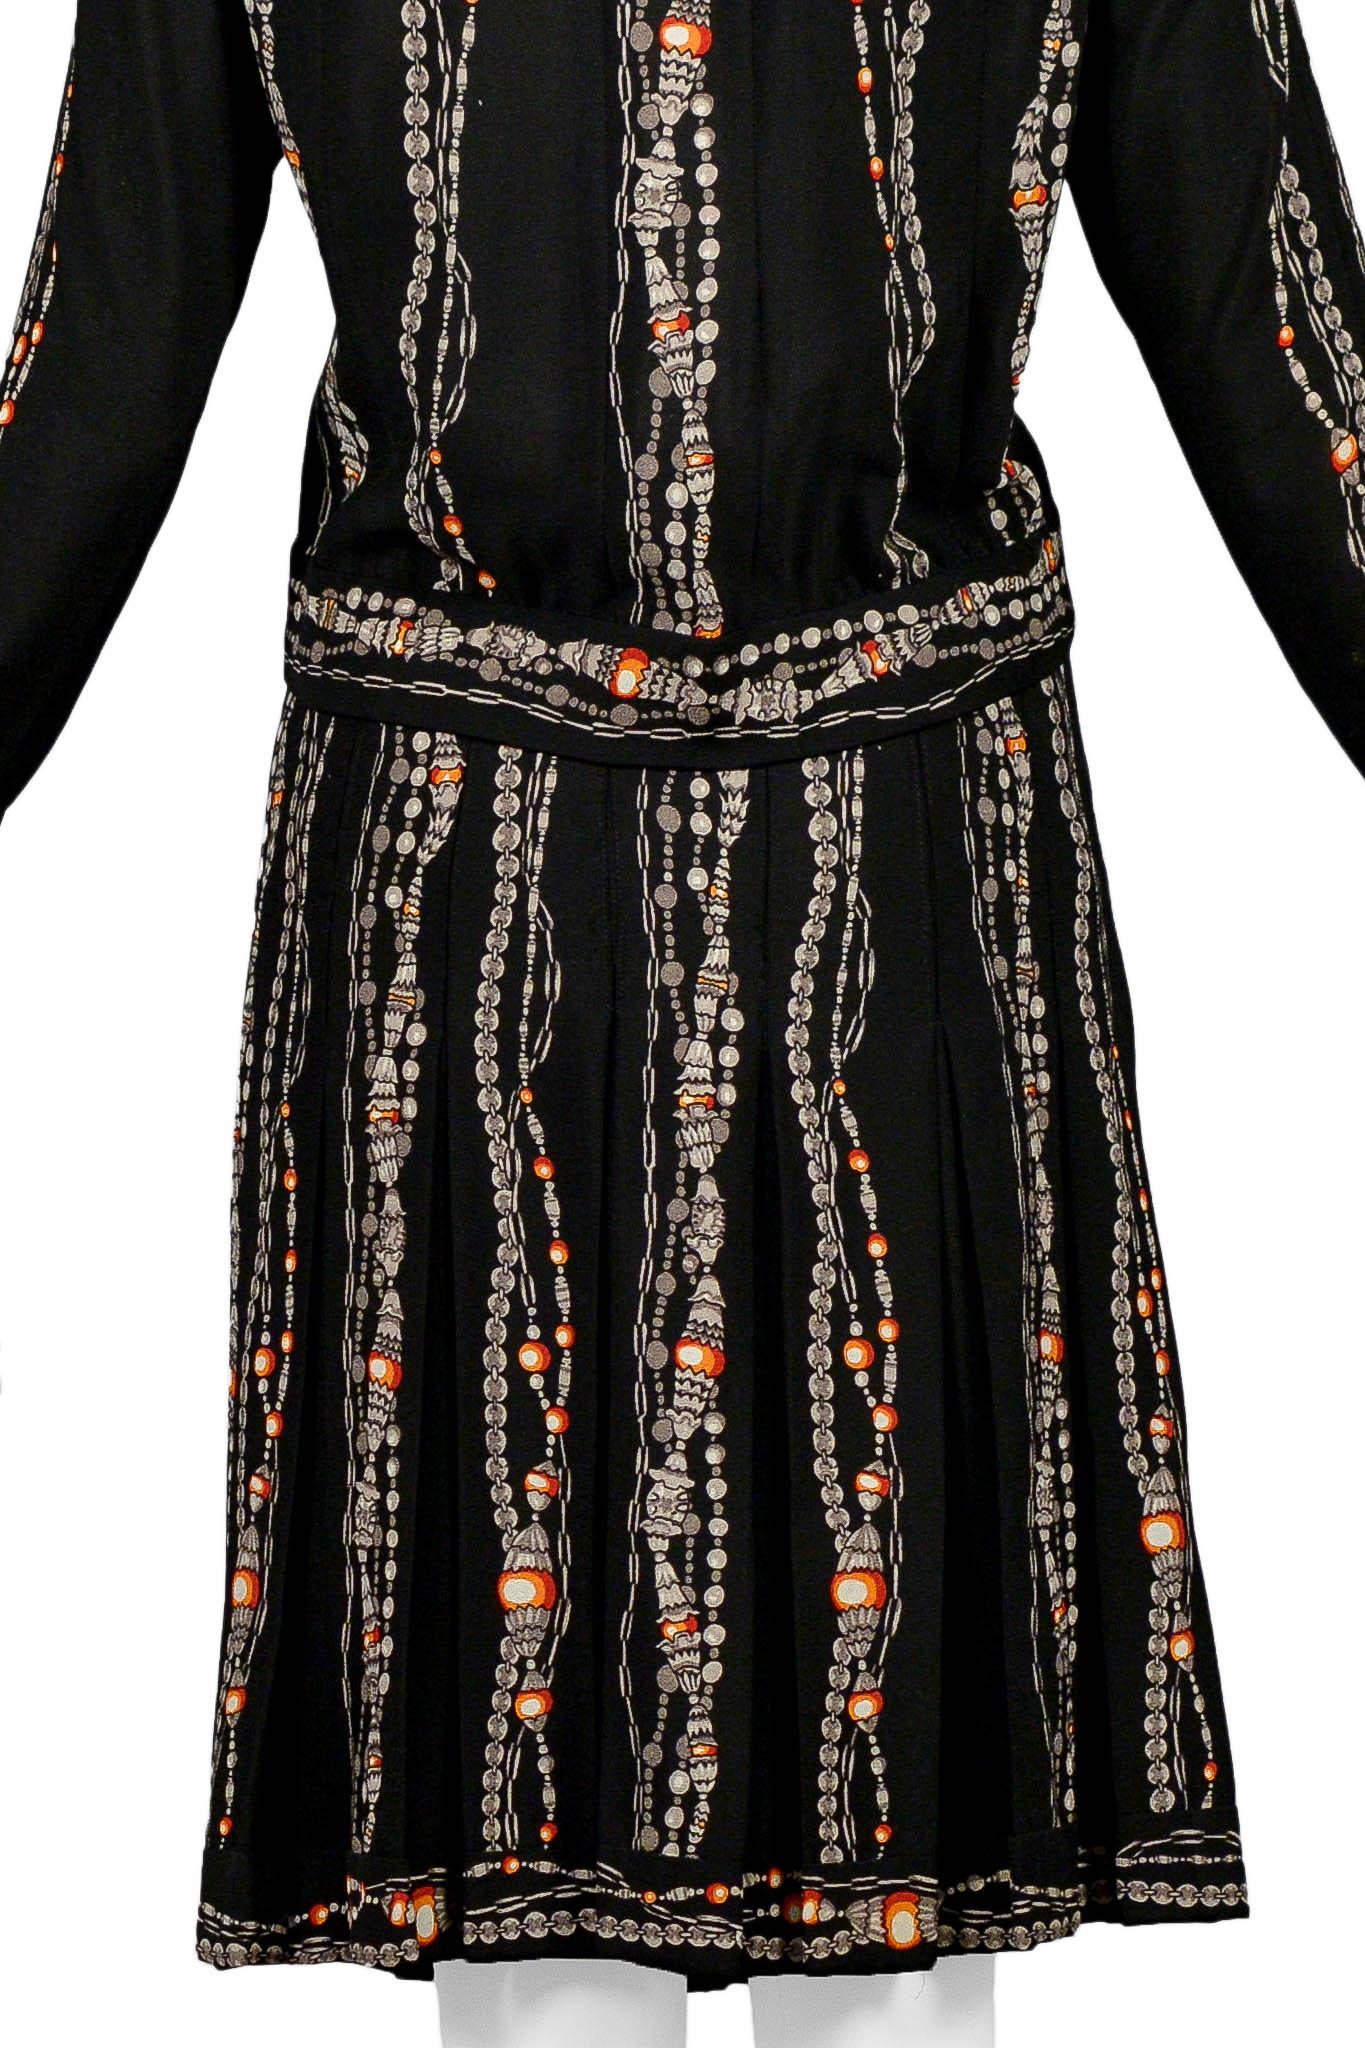 Chanel Black Skirt Suit With Iconic Bead & Pearl Necklace Print For Sale 5